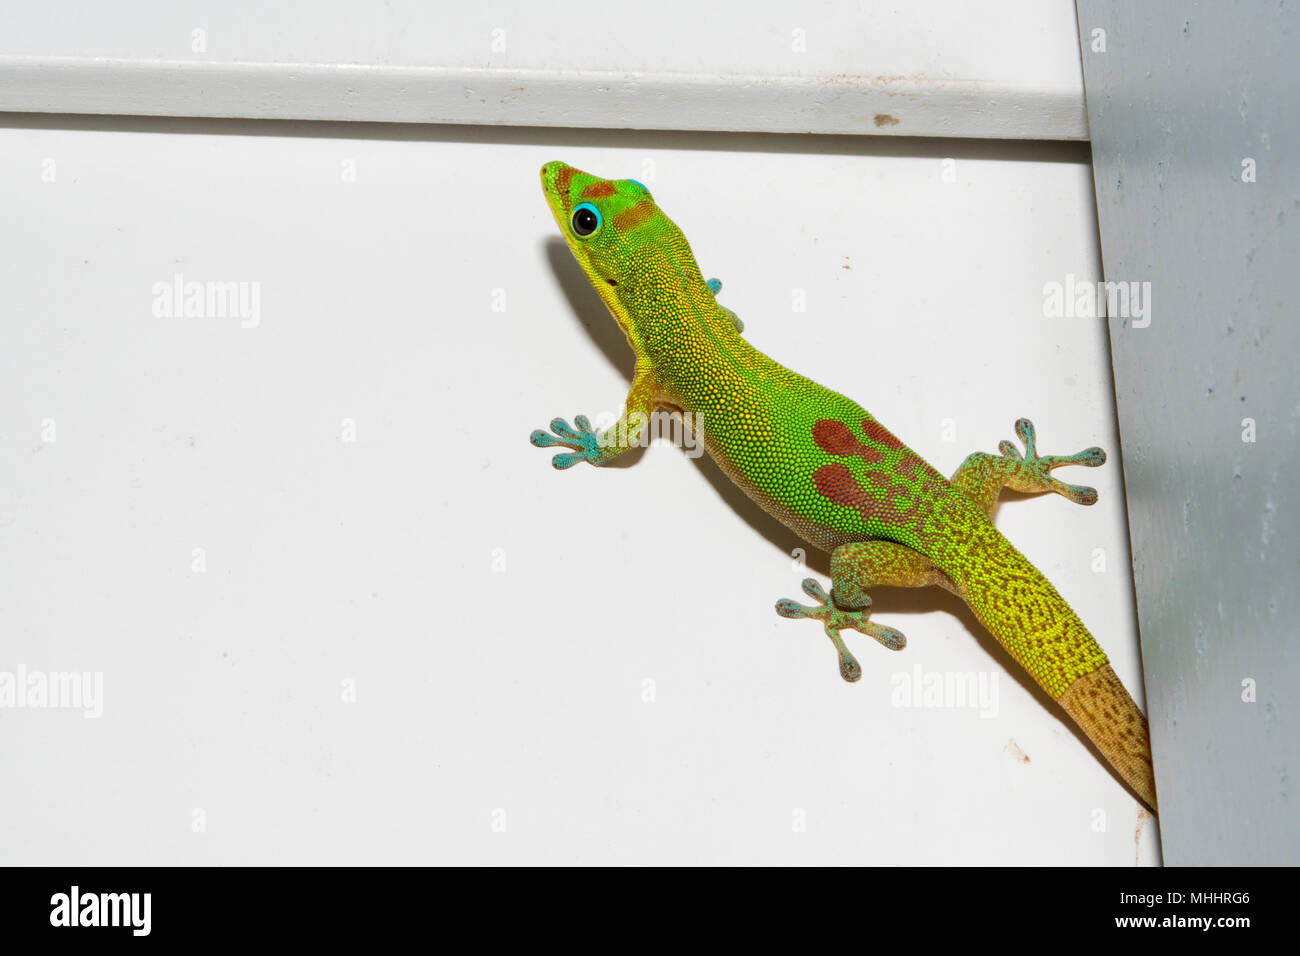 green red and blue Gold dust day gecko from hawaii Stock Photo